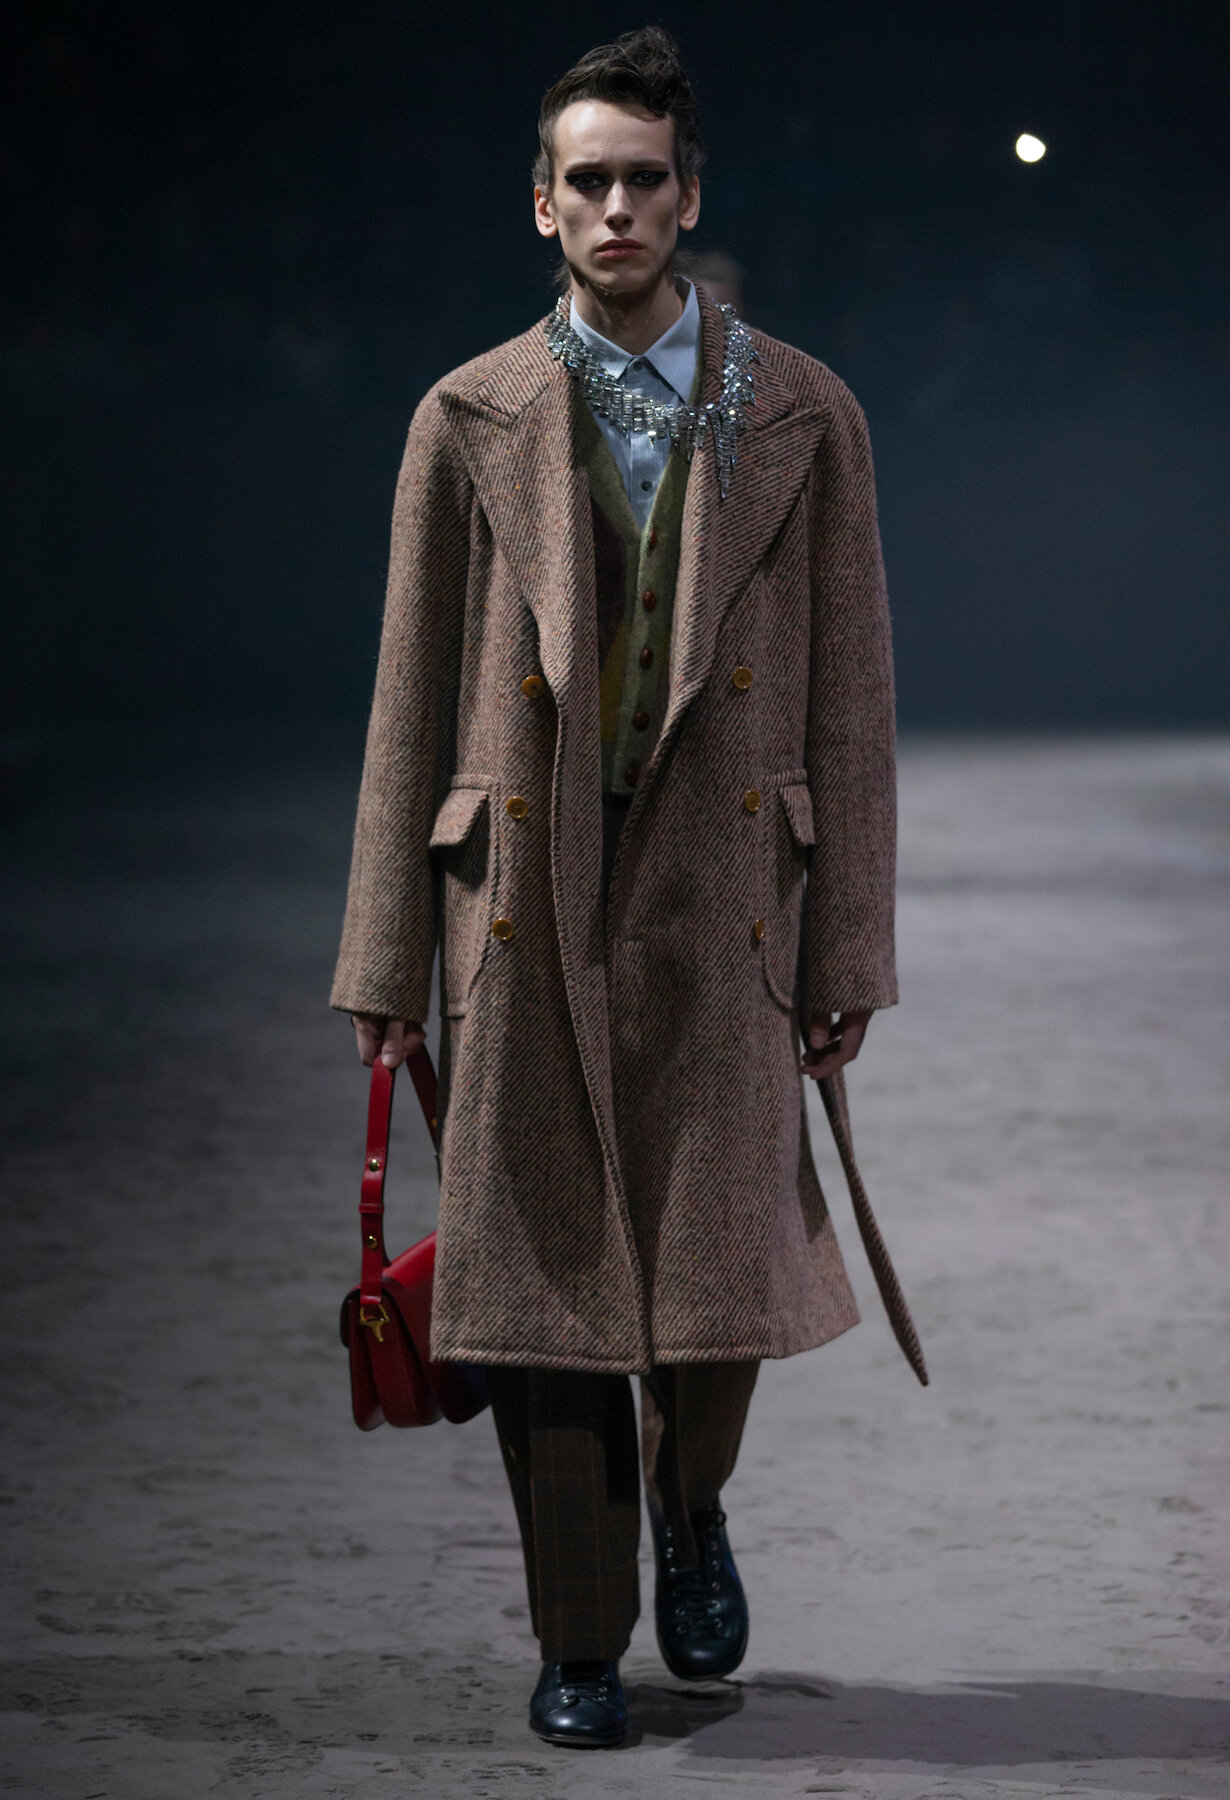 Gucci Fall Winter 2020 Men_s Collection (Look 7).jpg